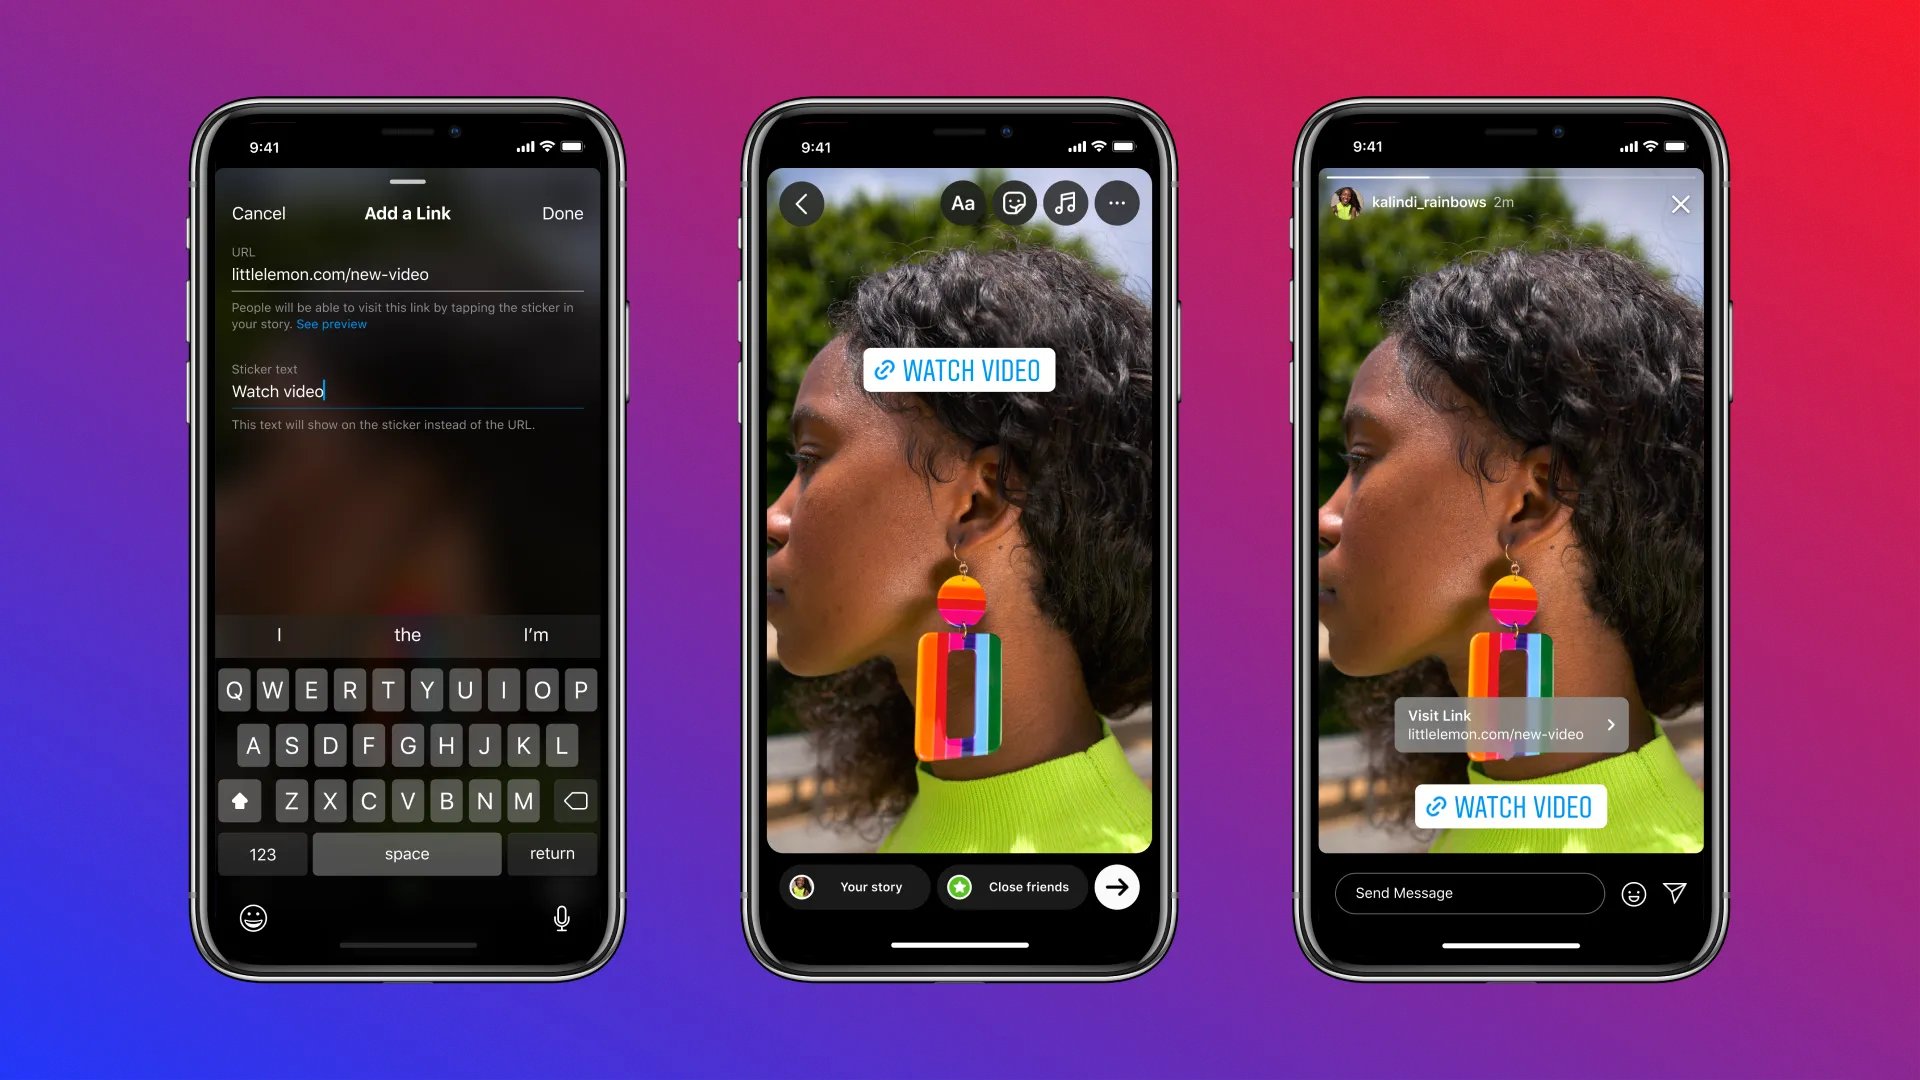 How to customize your links on Instagram Stories